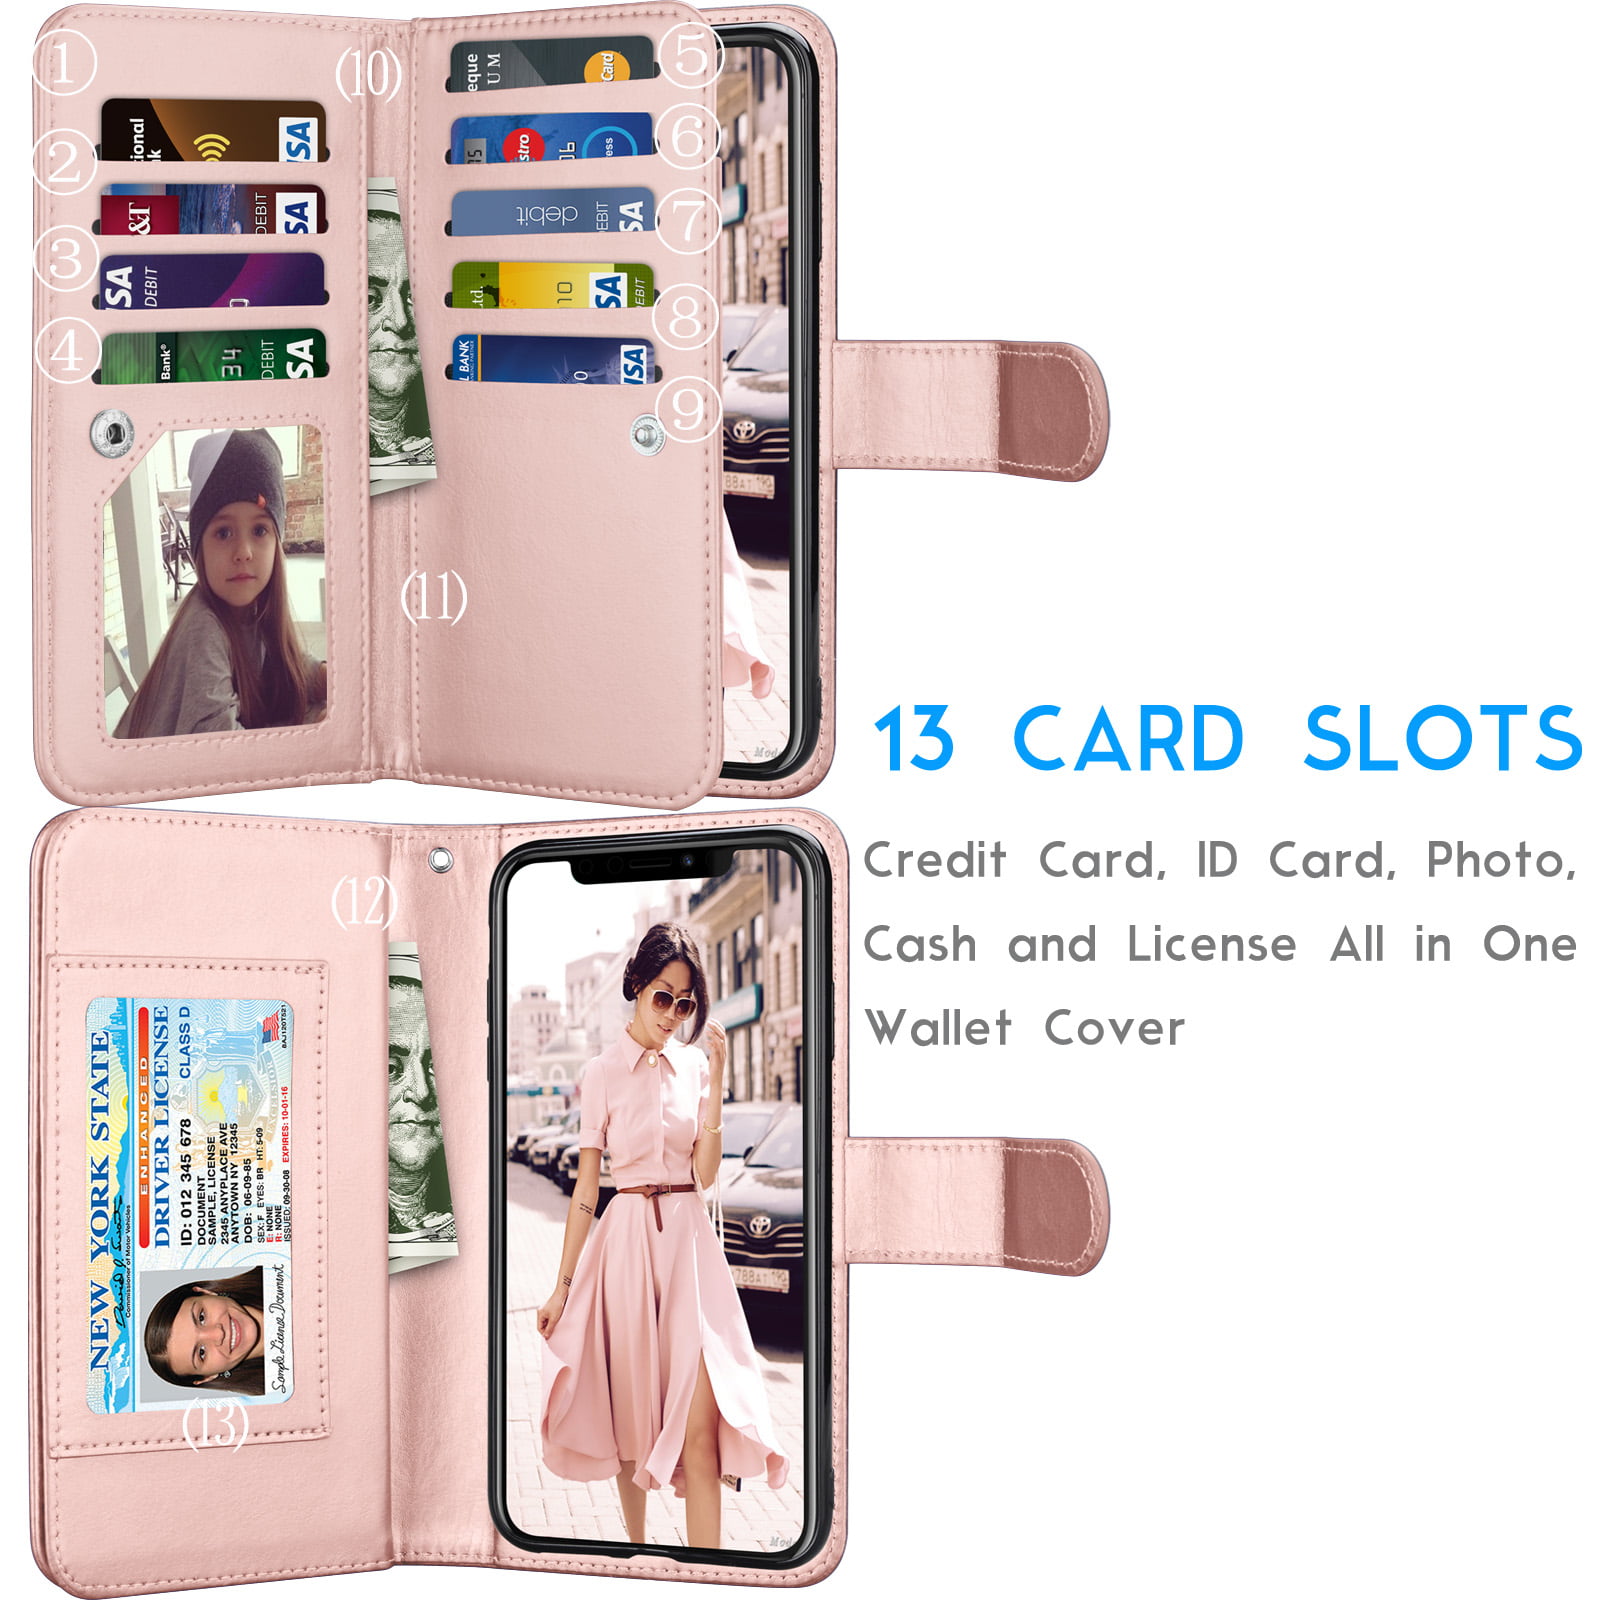 Lomogo Leather Wallet Case for iPhone XSMax with Stand Feature Card Holder Magnetic Closure LOHHA130074 Rose Gold Shockproof Flip Case Cover for Apple iPhone XS Max 